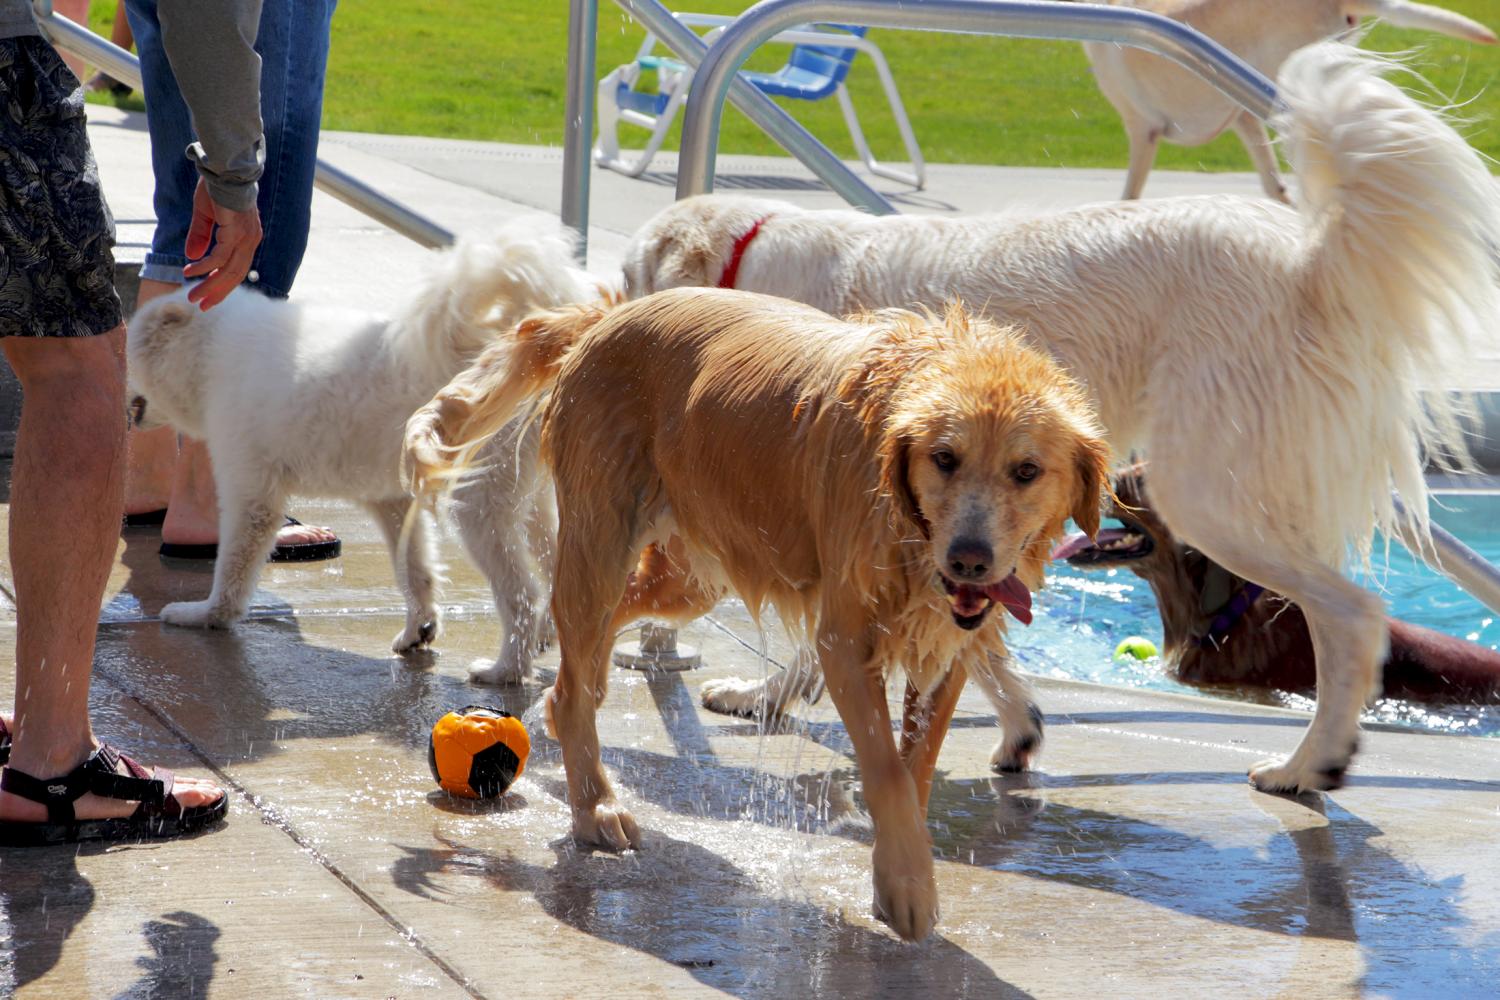 People and dogs of the Palouse flock to the Hamilton-Lowe Aquatic Center during the Howling at Hamilton event on Sept. 11, 2016 before the pool was winterized. More than 100 dogs of all breeds and sizes attended.